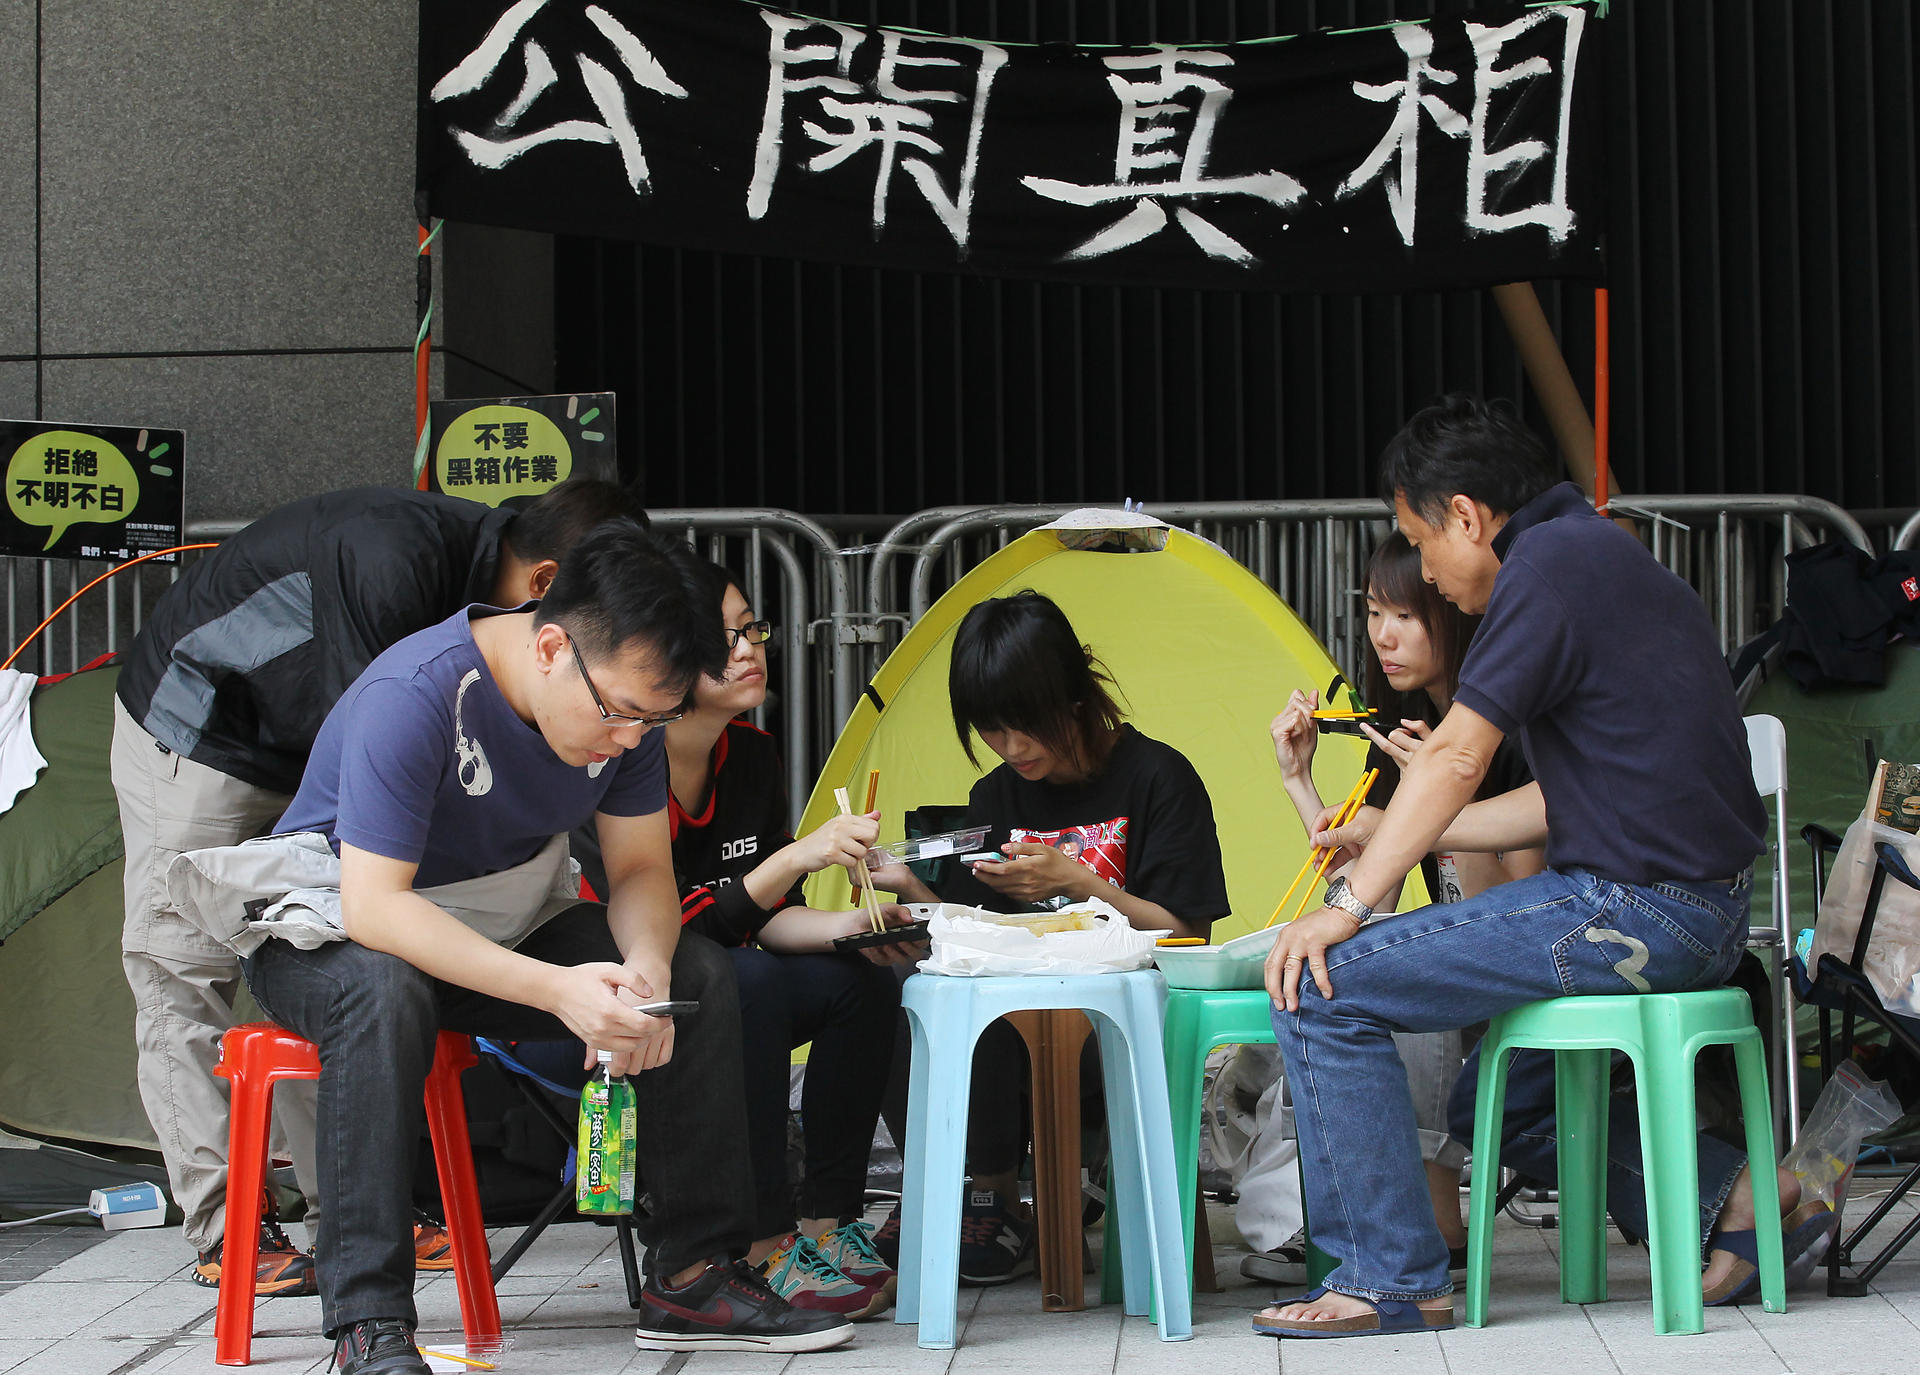 HKTV employees are still looking for answers. Photo: Edward Wong